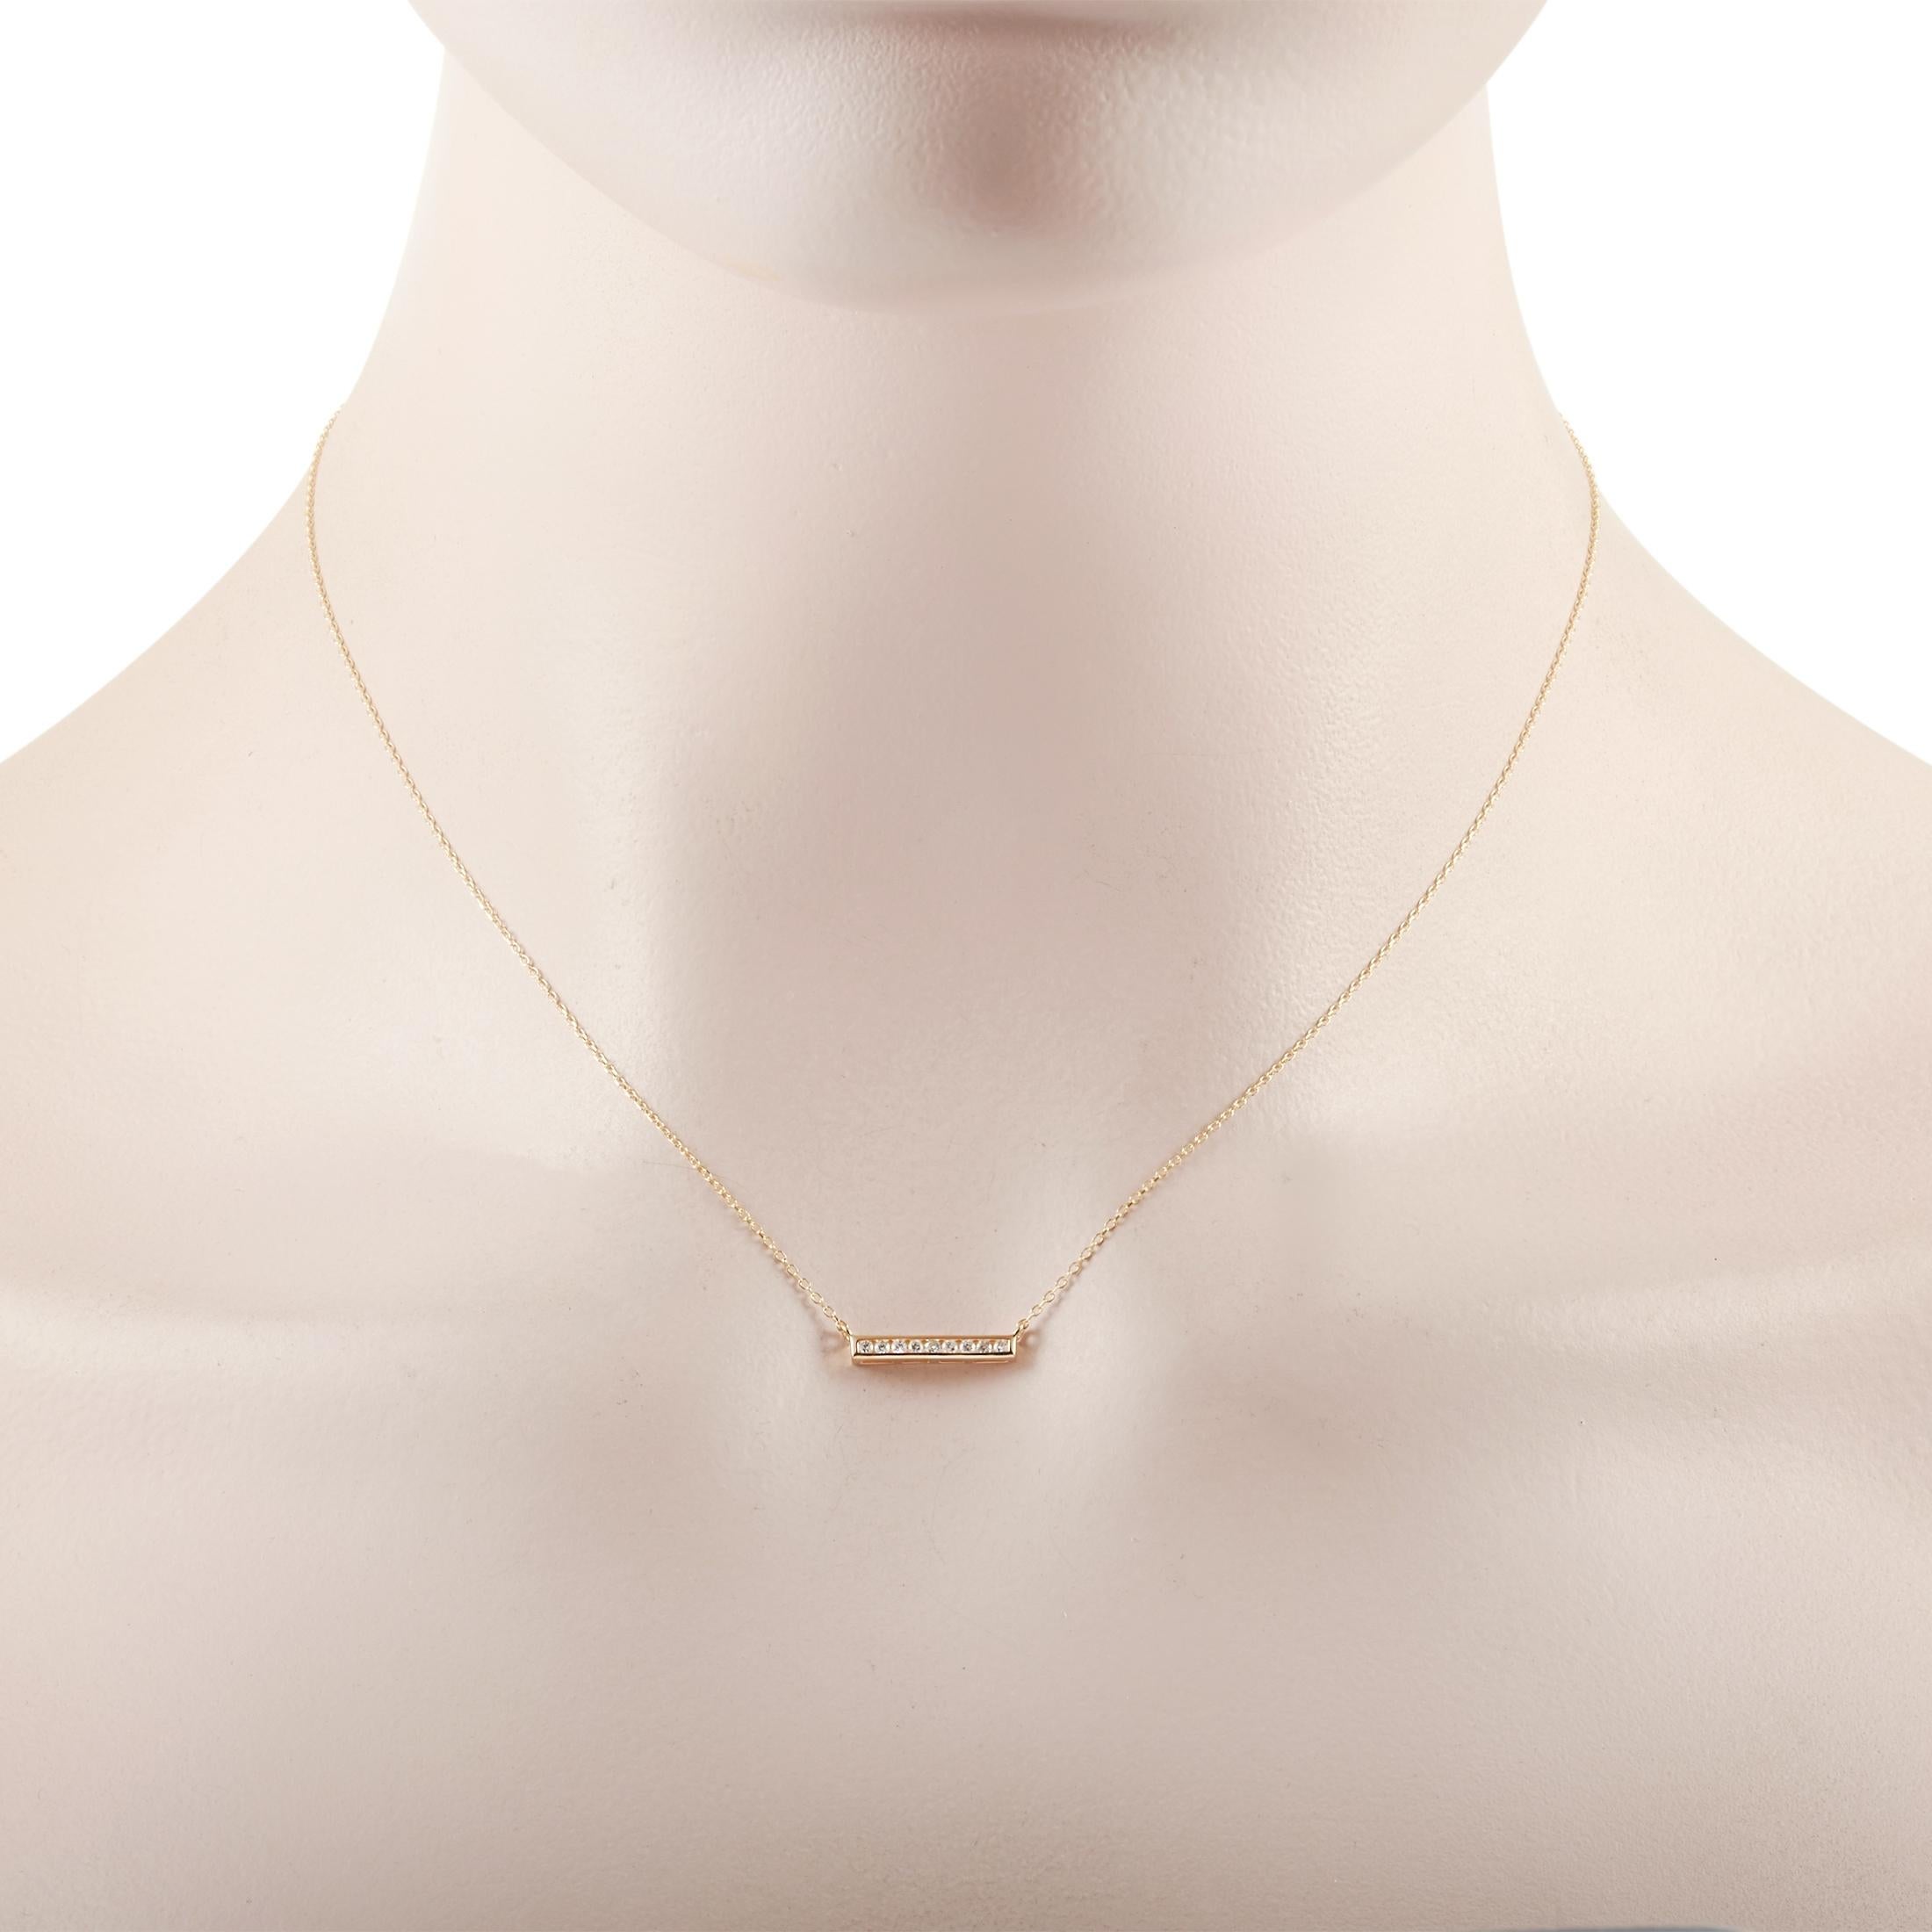 This LB Exclusive necklace is crafted from 14K yellow gold and weighs 1.6 grams. It is presented with a 15” chain and boasts a pendant that measures 0.13” in length and 0.50” in width. The necklace is set with diamonds that total 0.10 carats.
 
